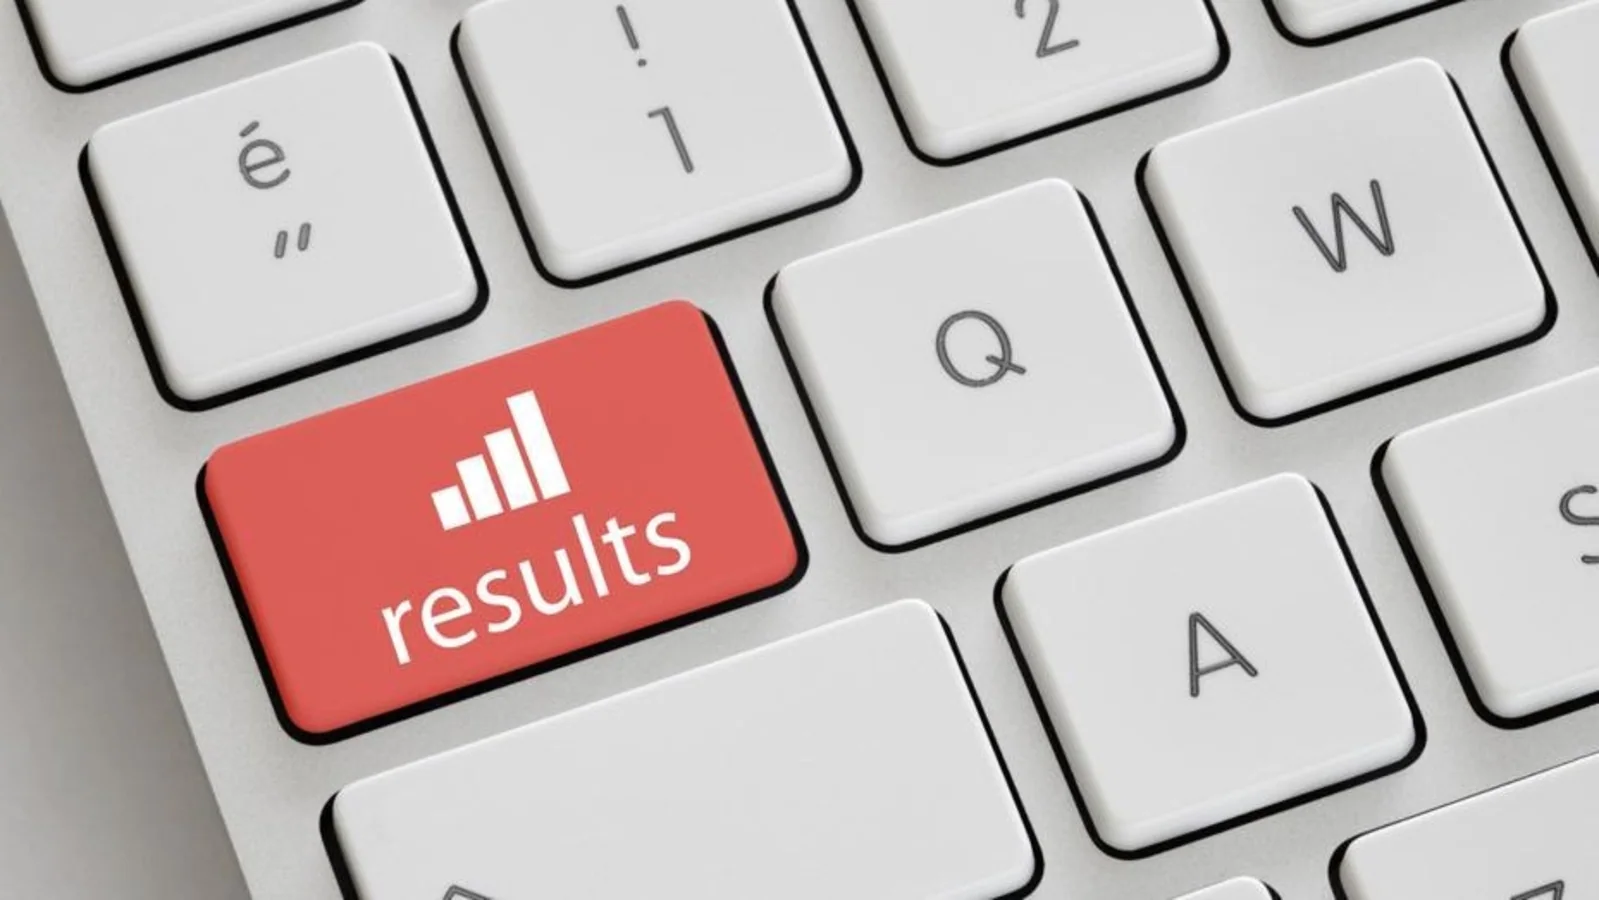 Odisha CHSE Result 2022: Odisha board Class 12th Science, Commerce results today